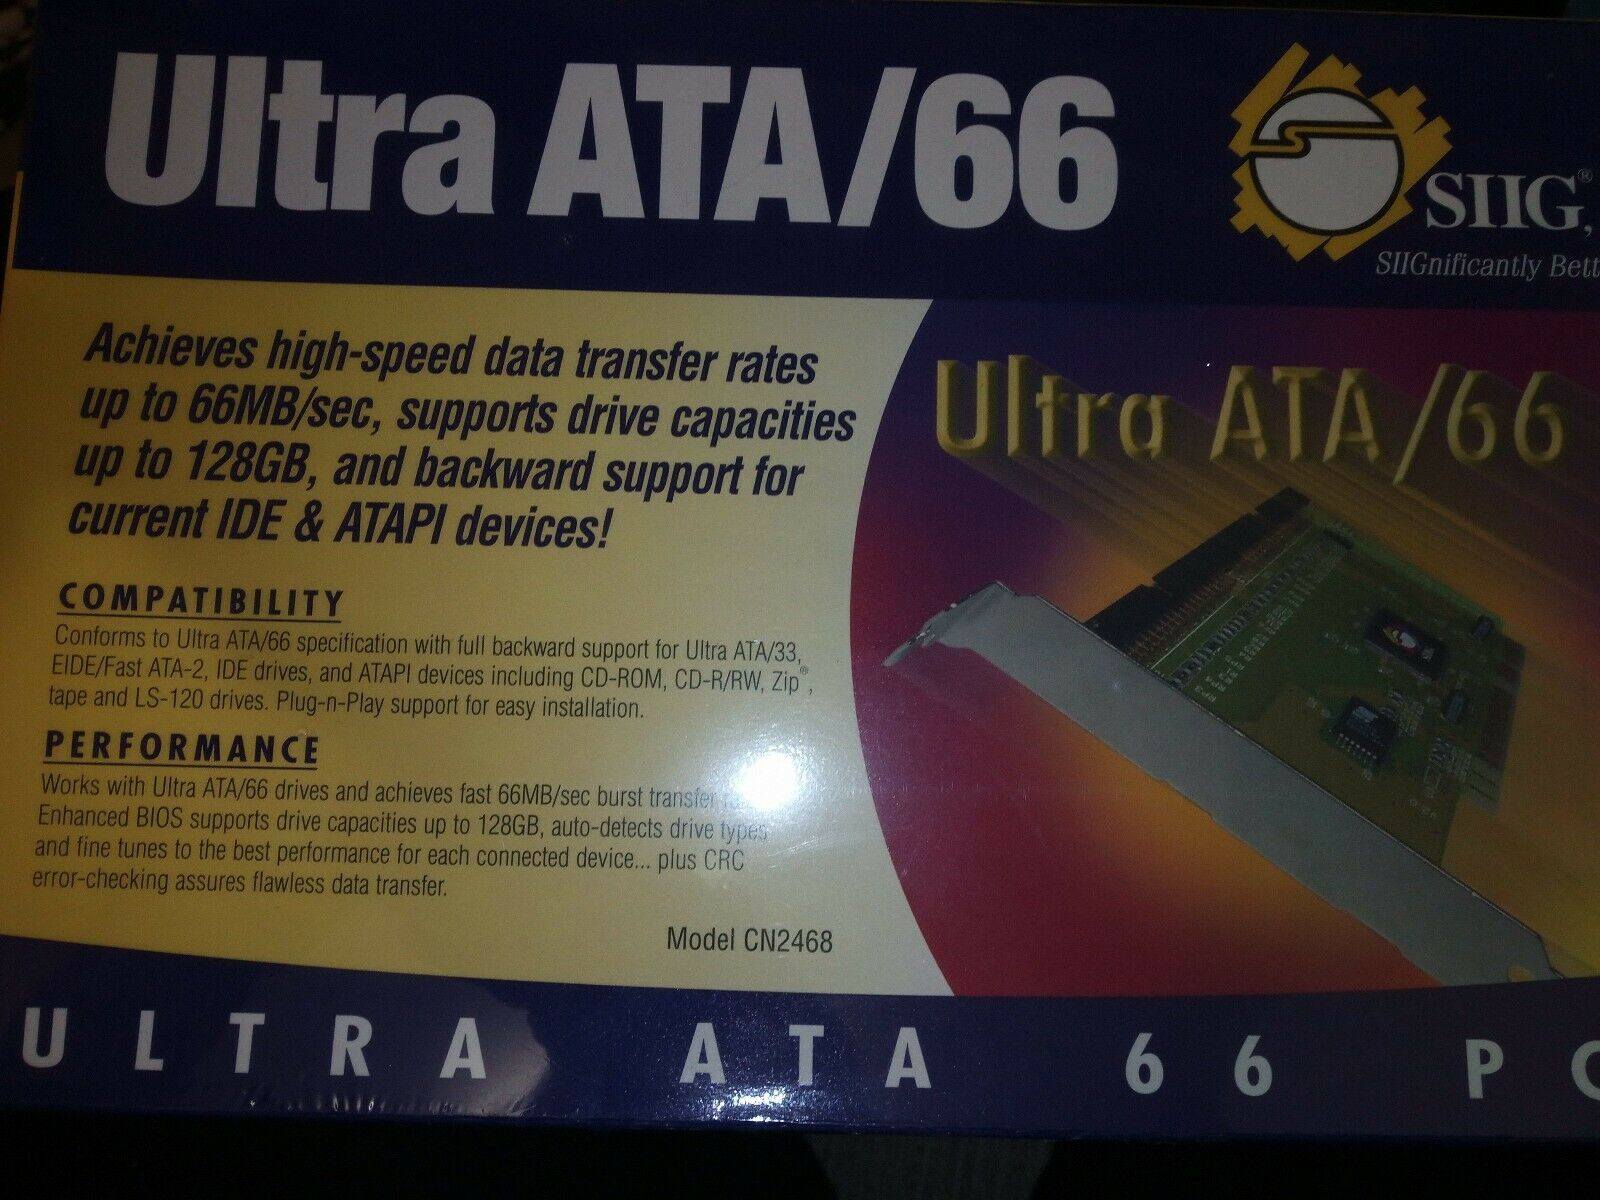 Siig Ultra Ata/66 Pci Bus Dual Channel Controller For Pentium Comp, Model Cn2468